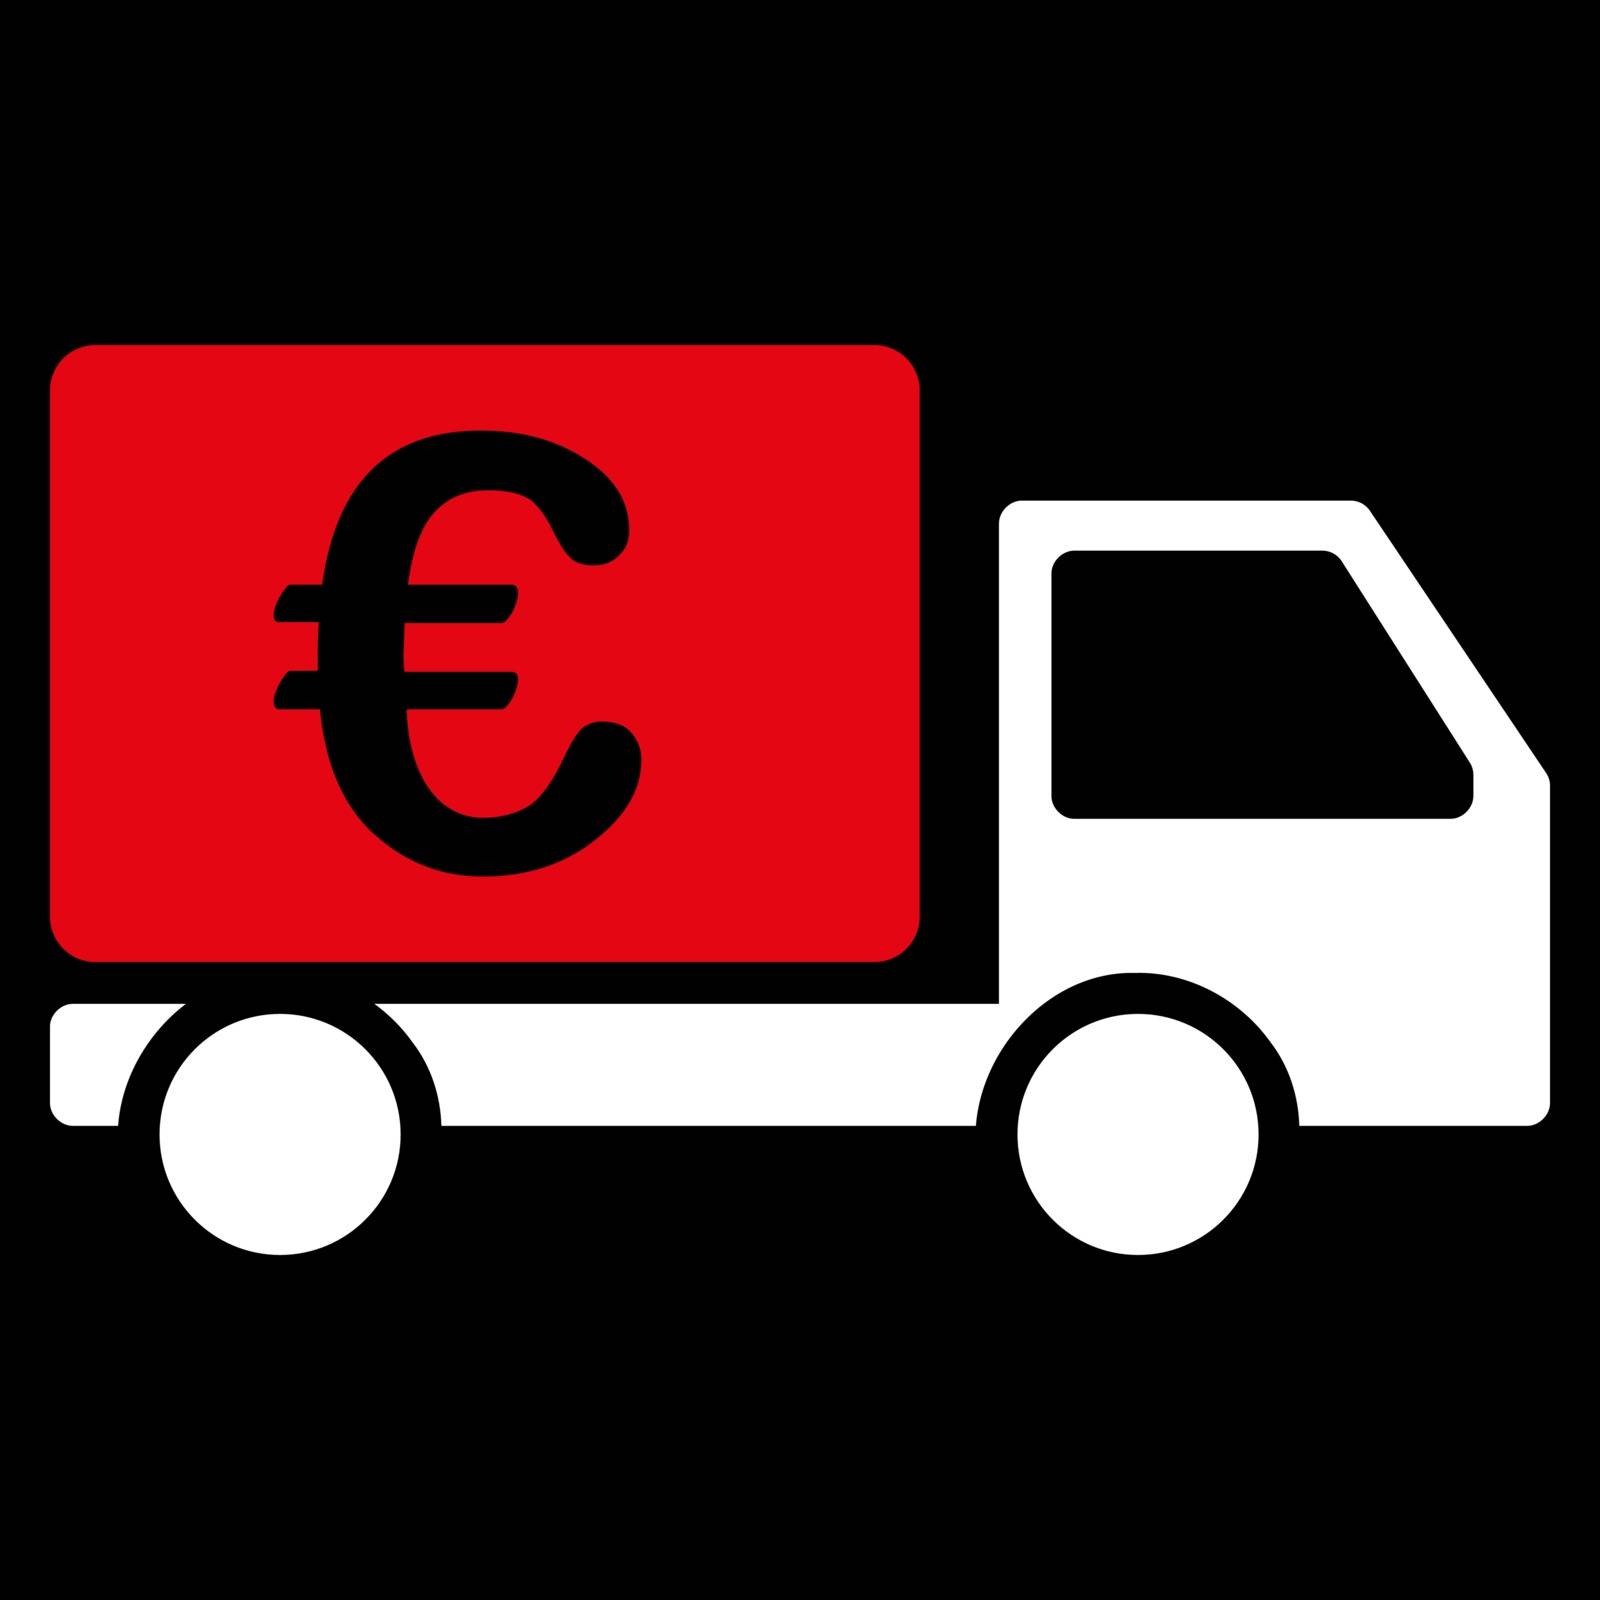 Collector car from BiColor Euro Banking Icon Set. Vector style is flat bicolor, red and white symbol, rounded angles, black background.